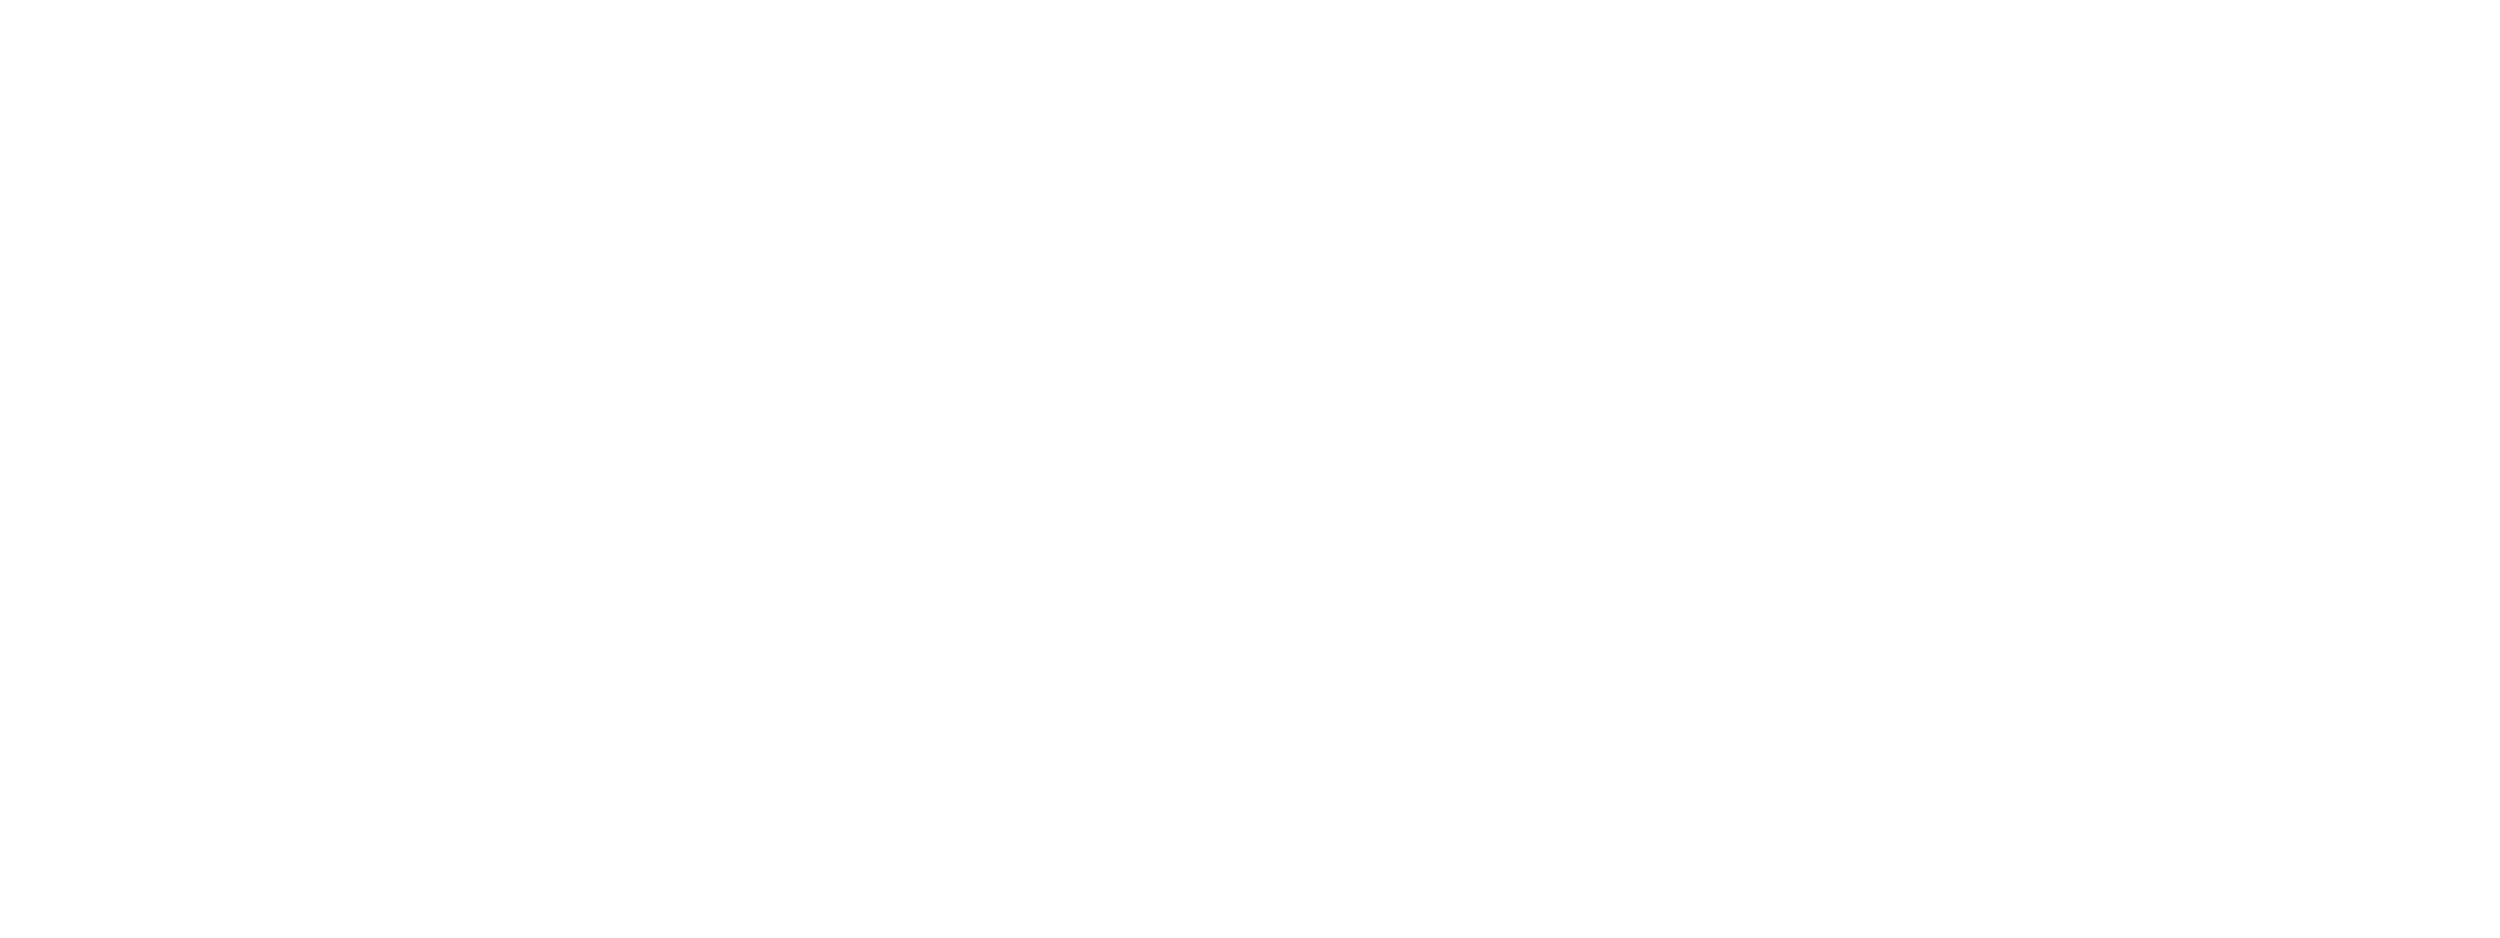 Curated Event Rentals | Styling